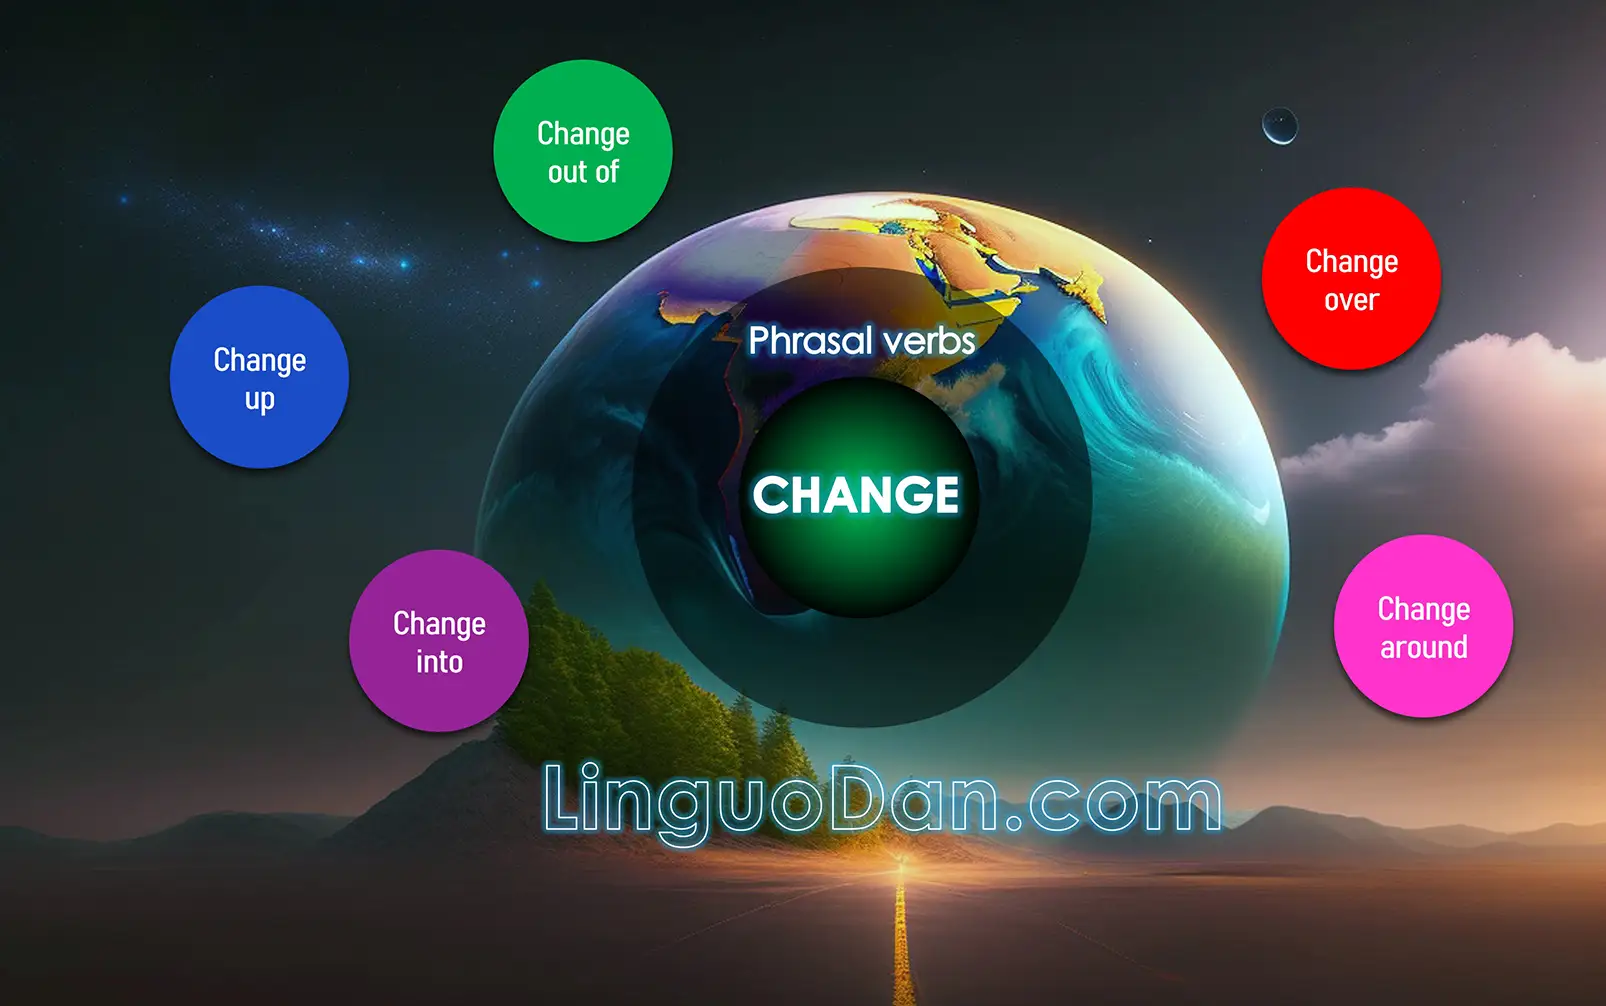 Phrasal Verbs: Add “OUT” to change the meaning of these 8 verbs